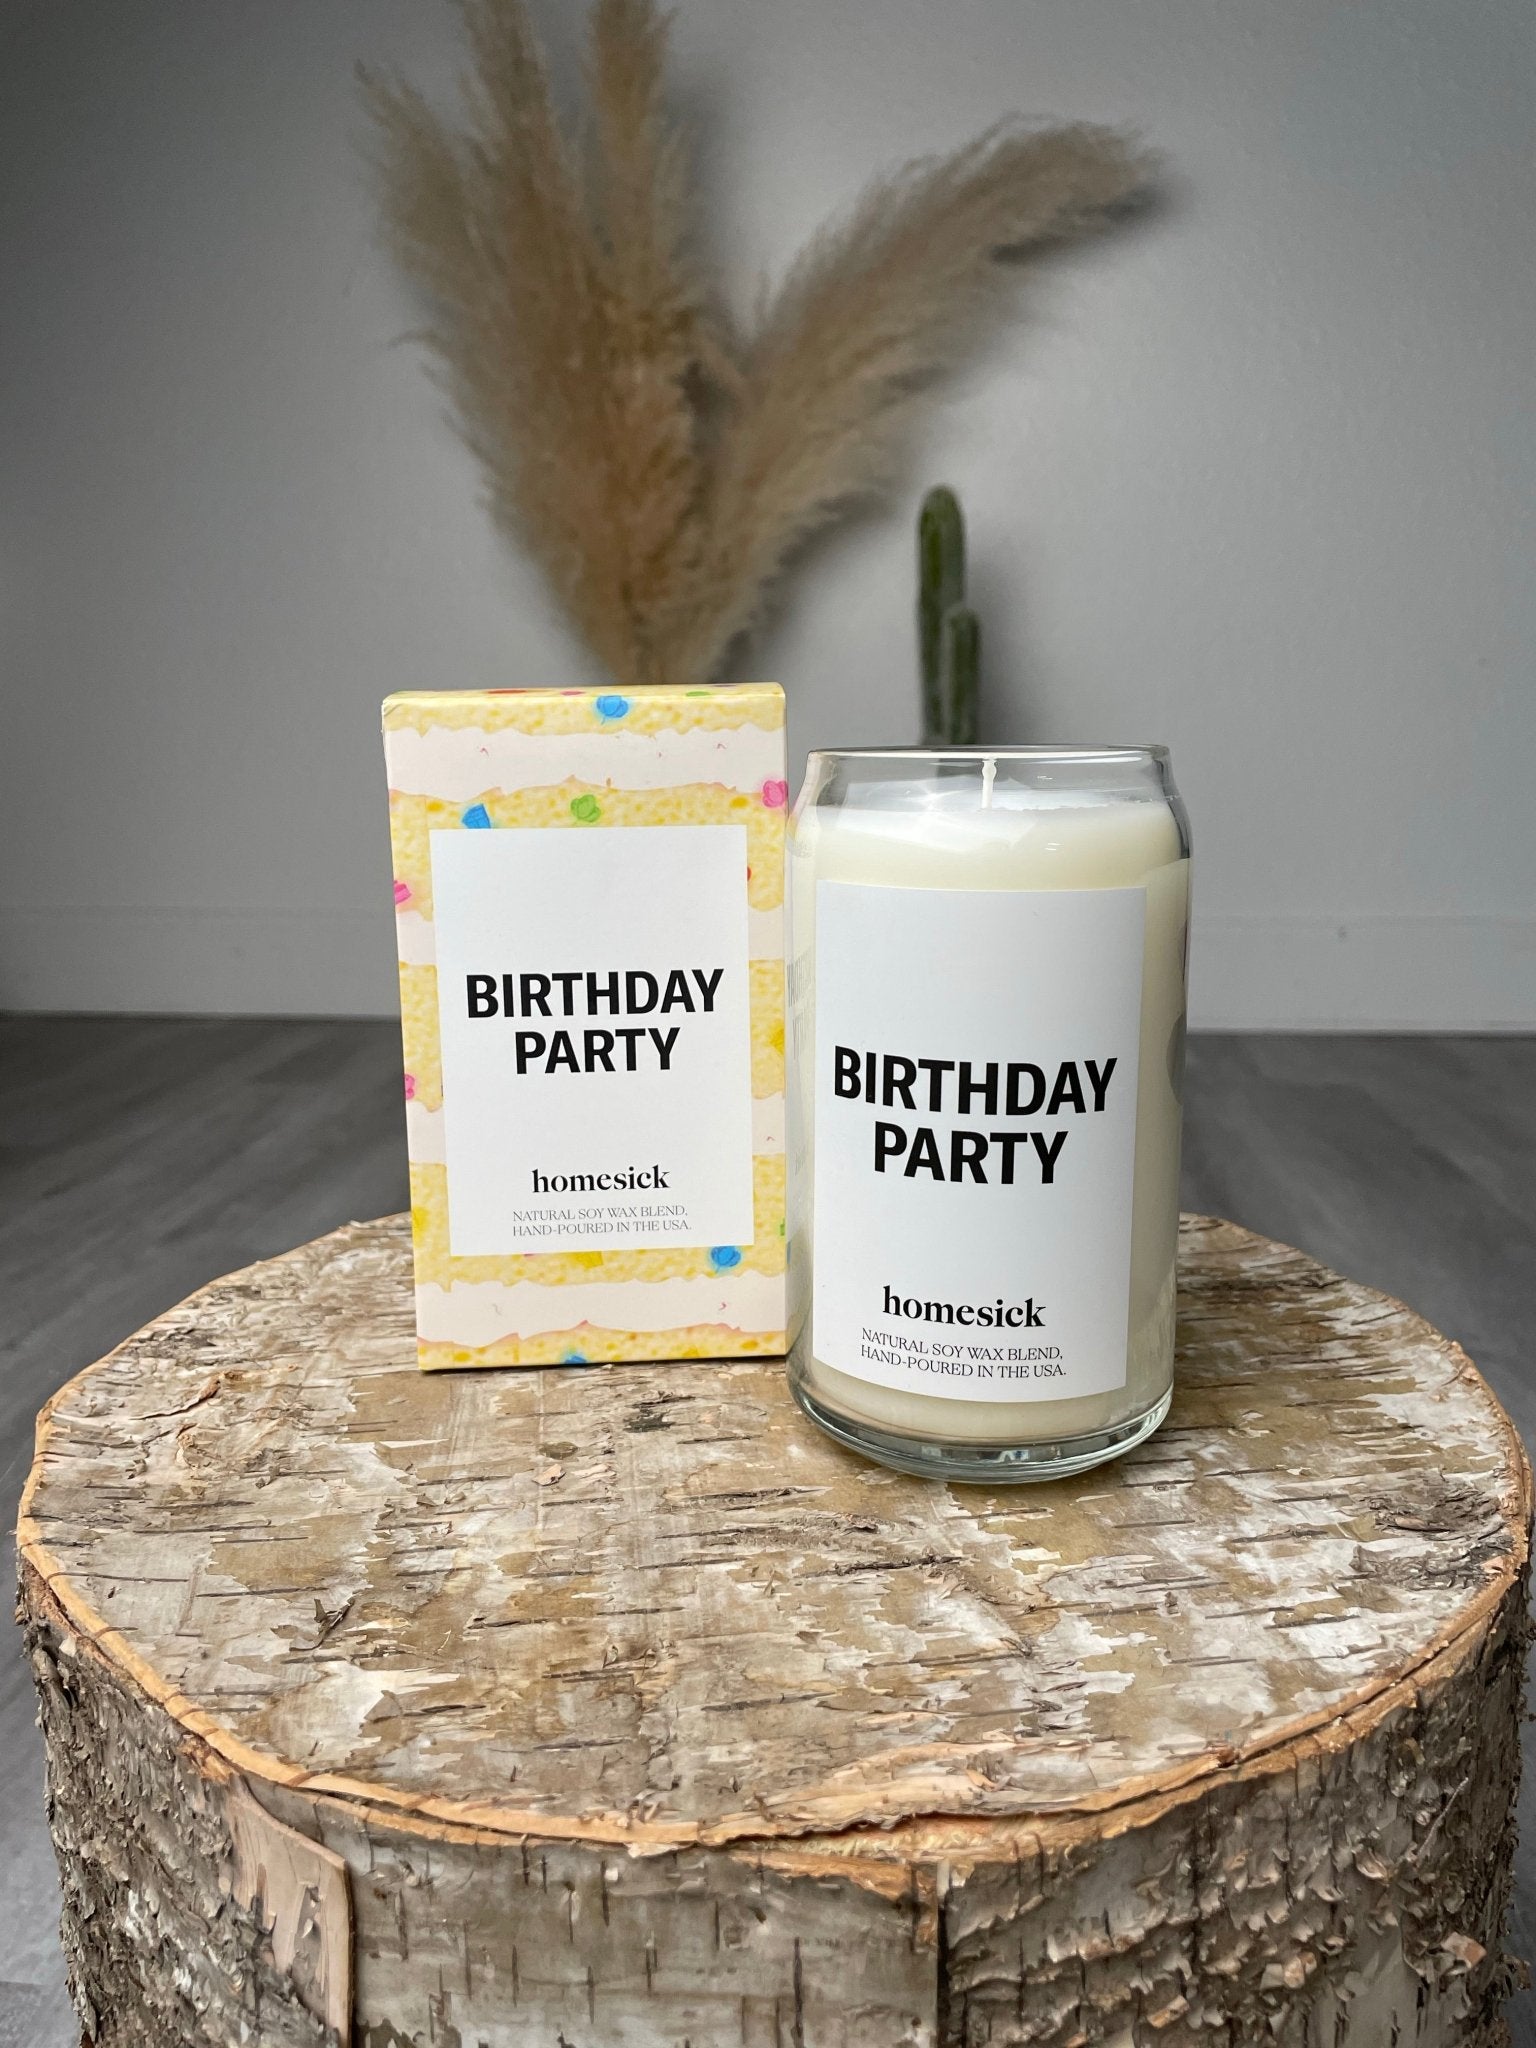 Homesick birthday party candle - Trendy Candles at Lush Fashion Lounge Boutique in Oklahoma City